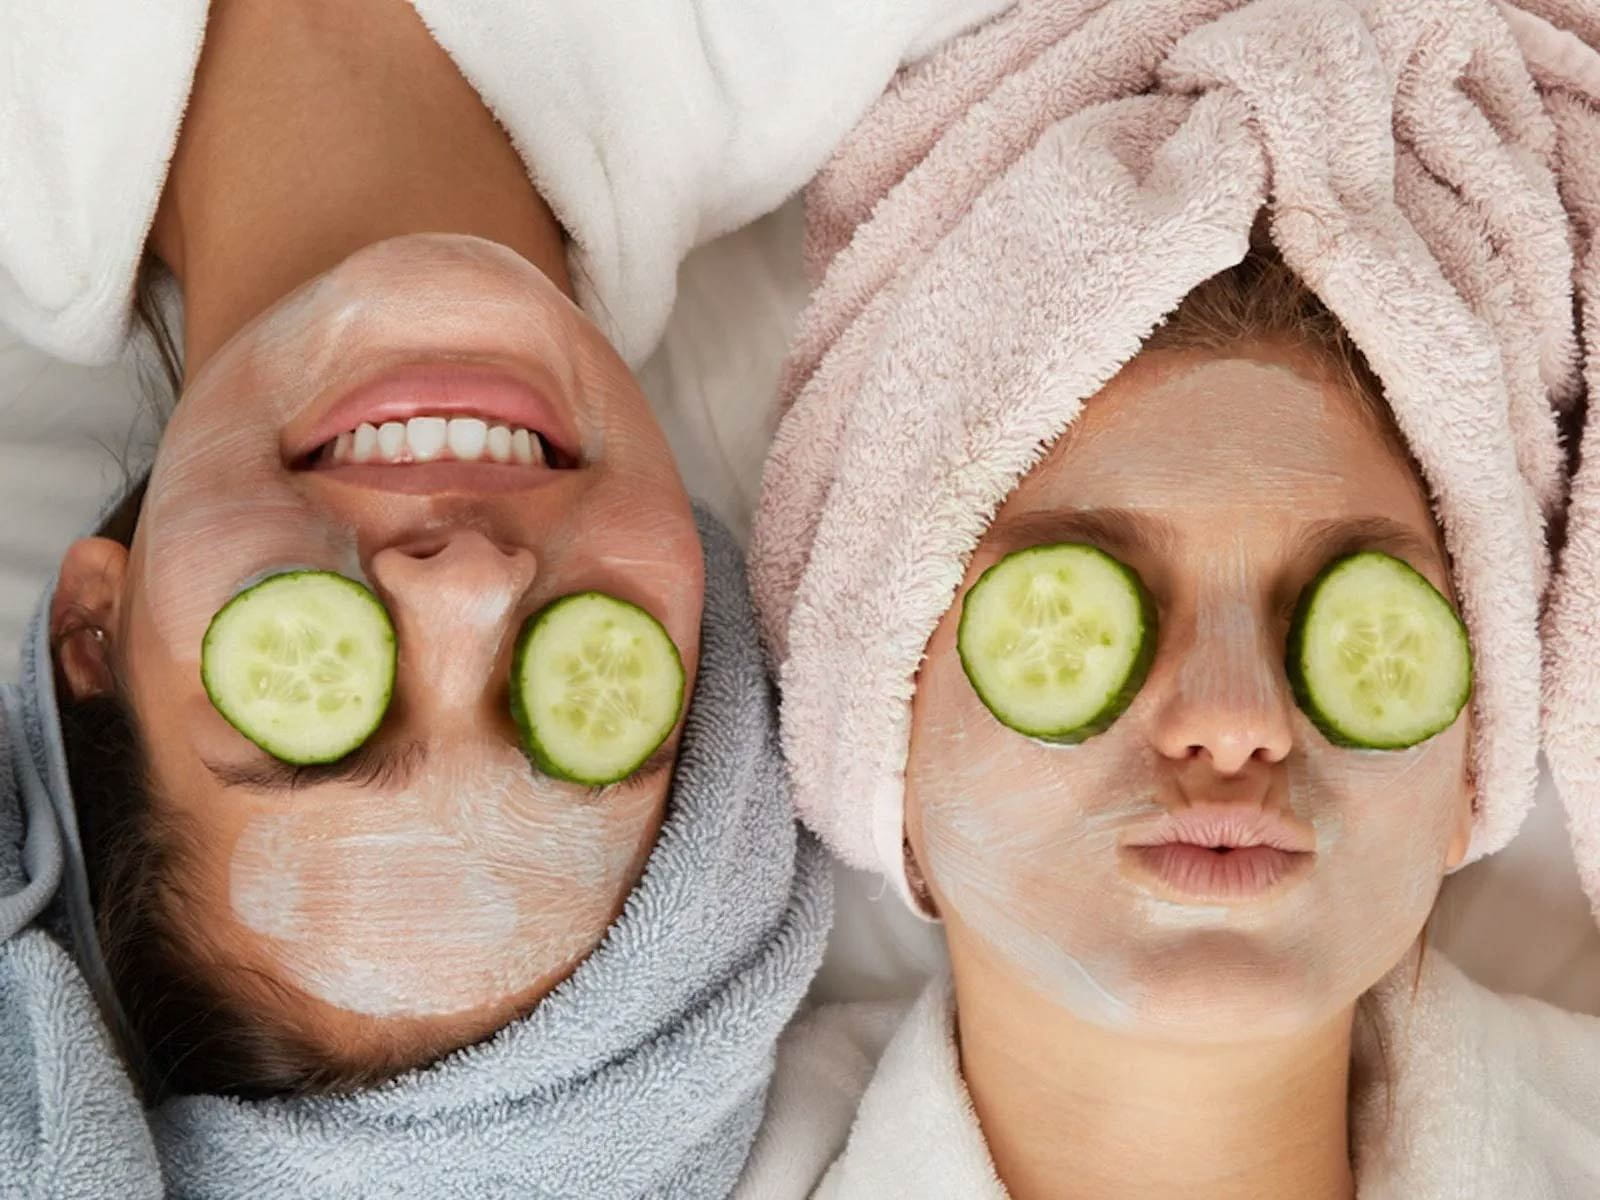 View of two models with cucumber slices covering their eyes and towels over their hair while laying down side by side.